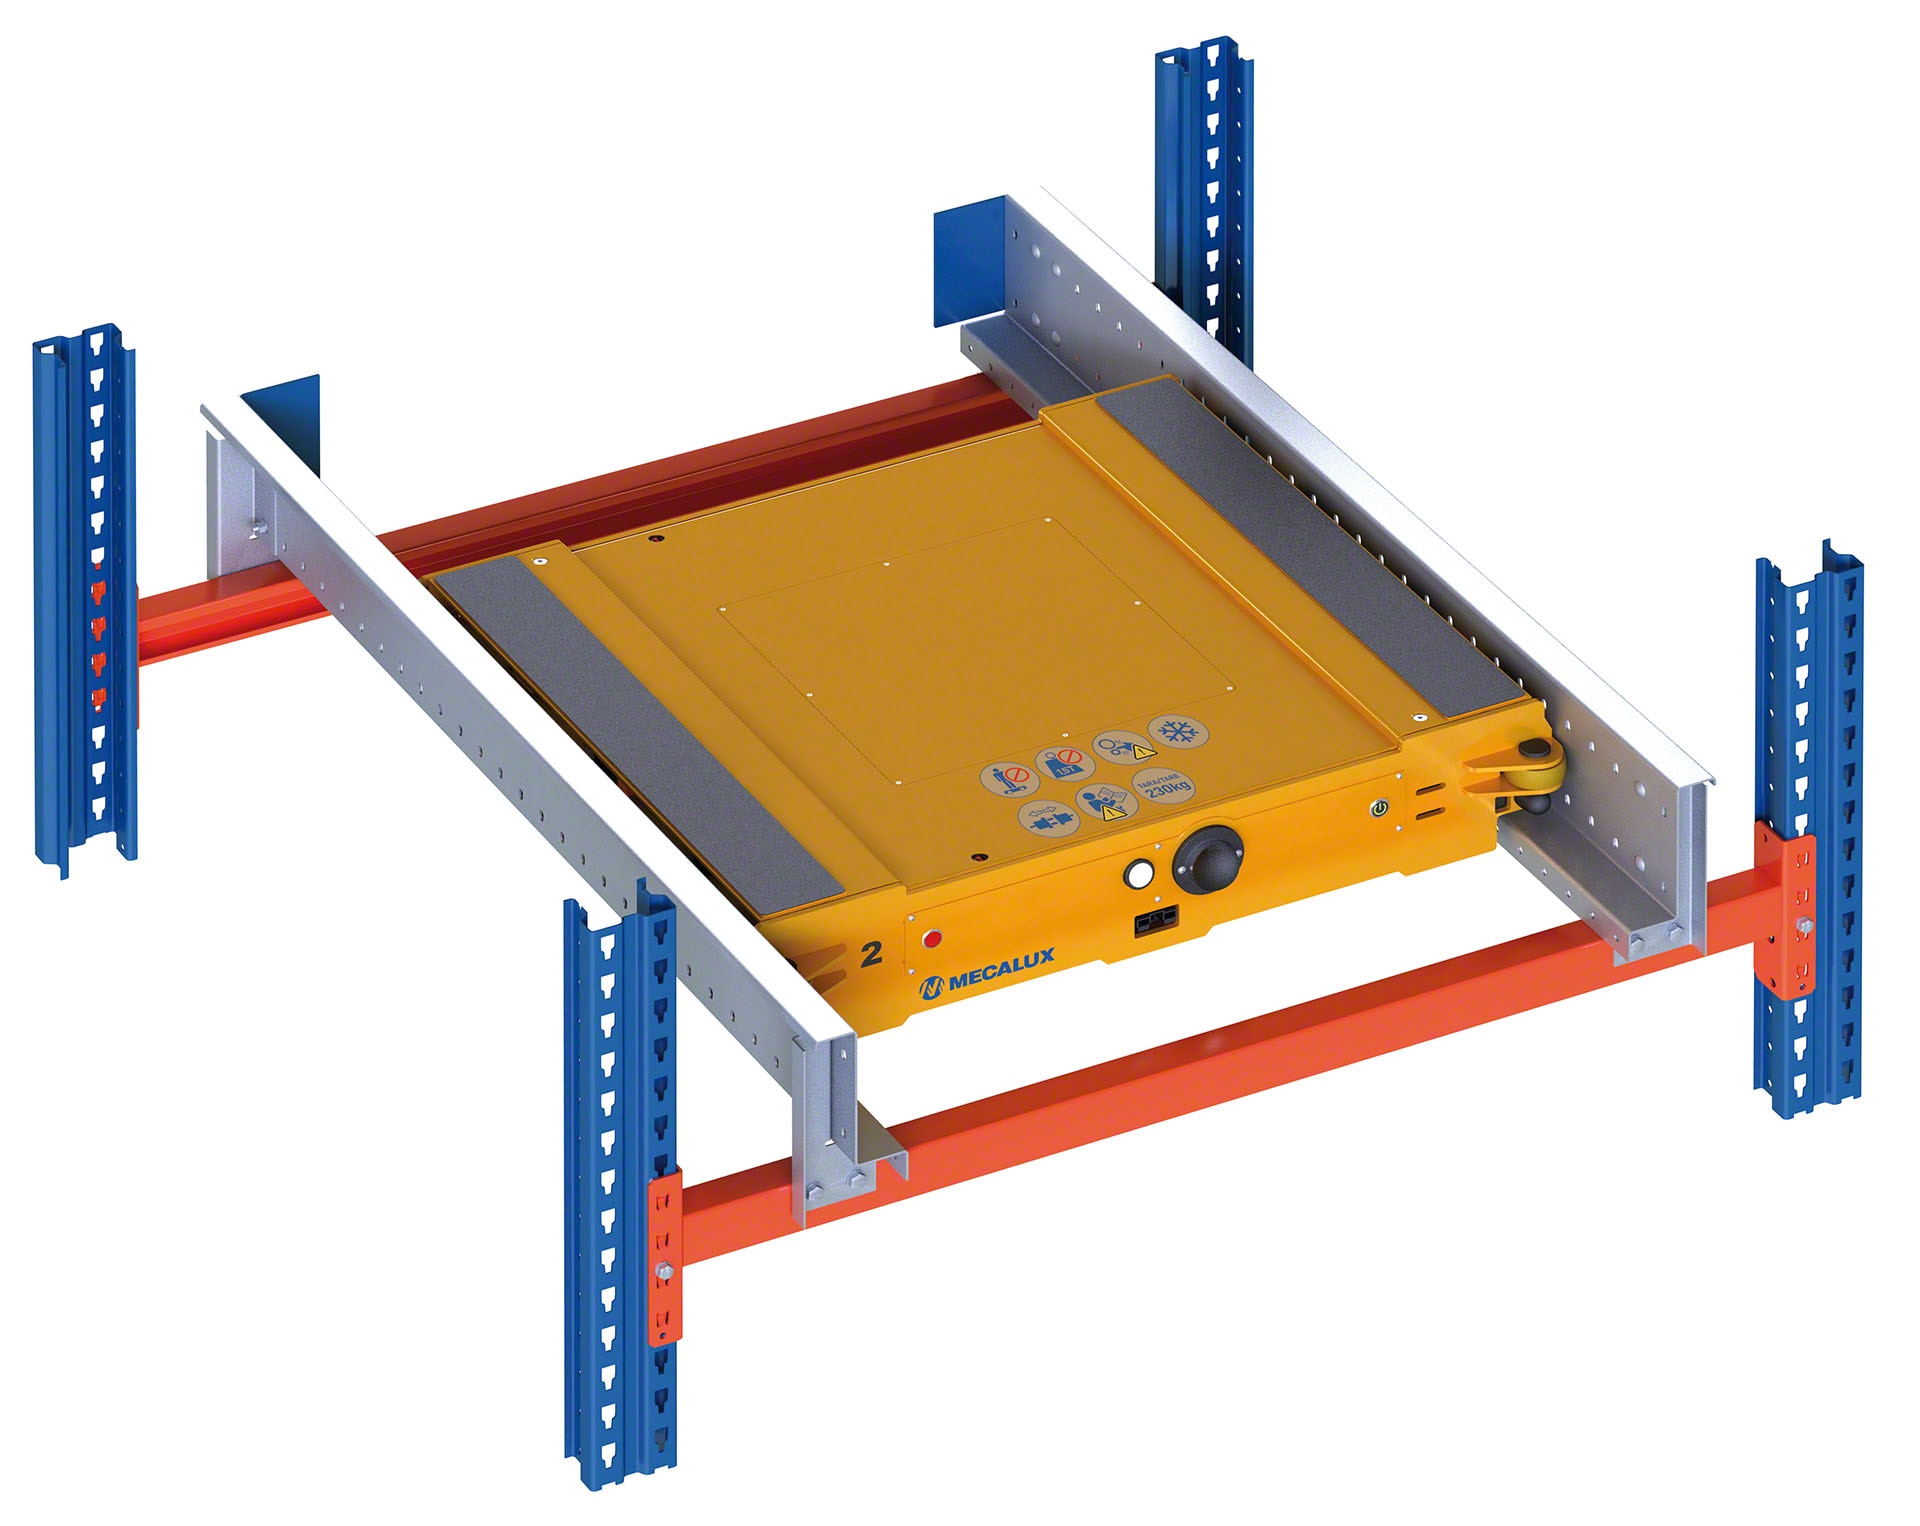 The storage channels must be adapted so that the Pallet Shuttle can be inserted on each rail